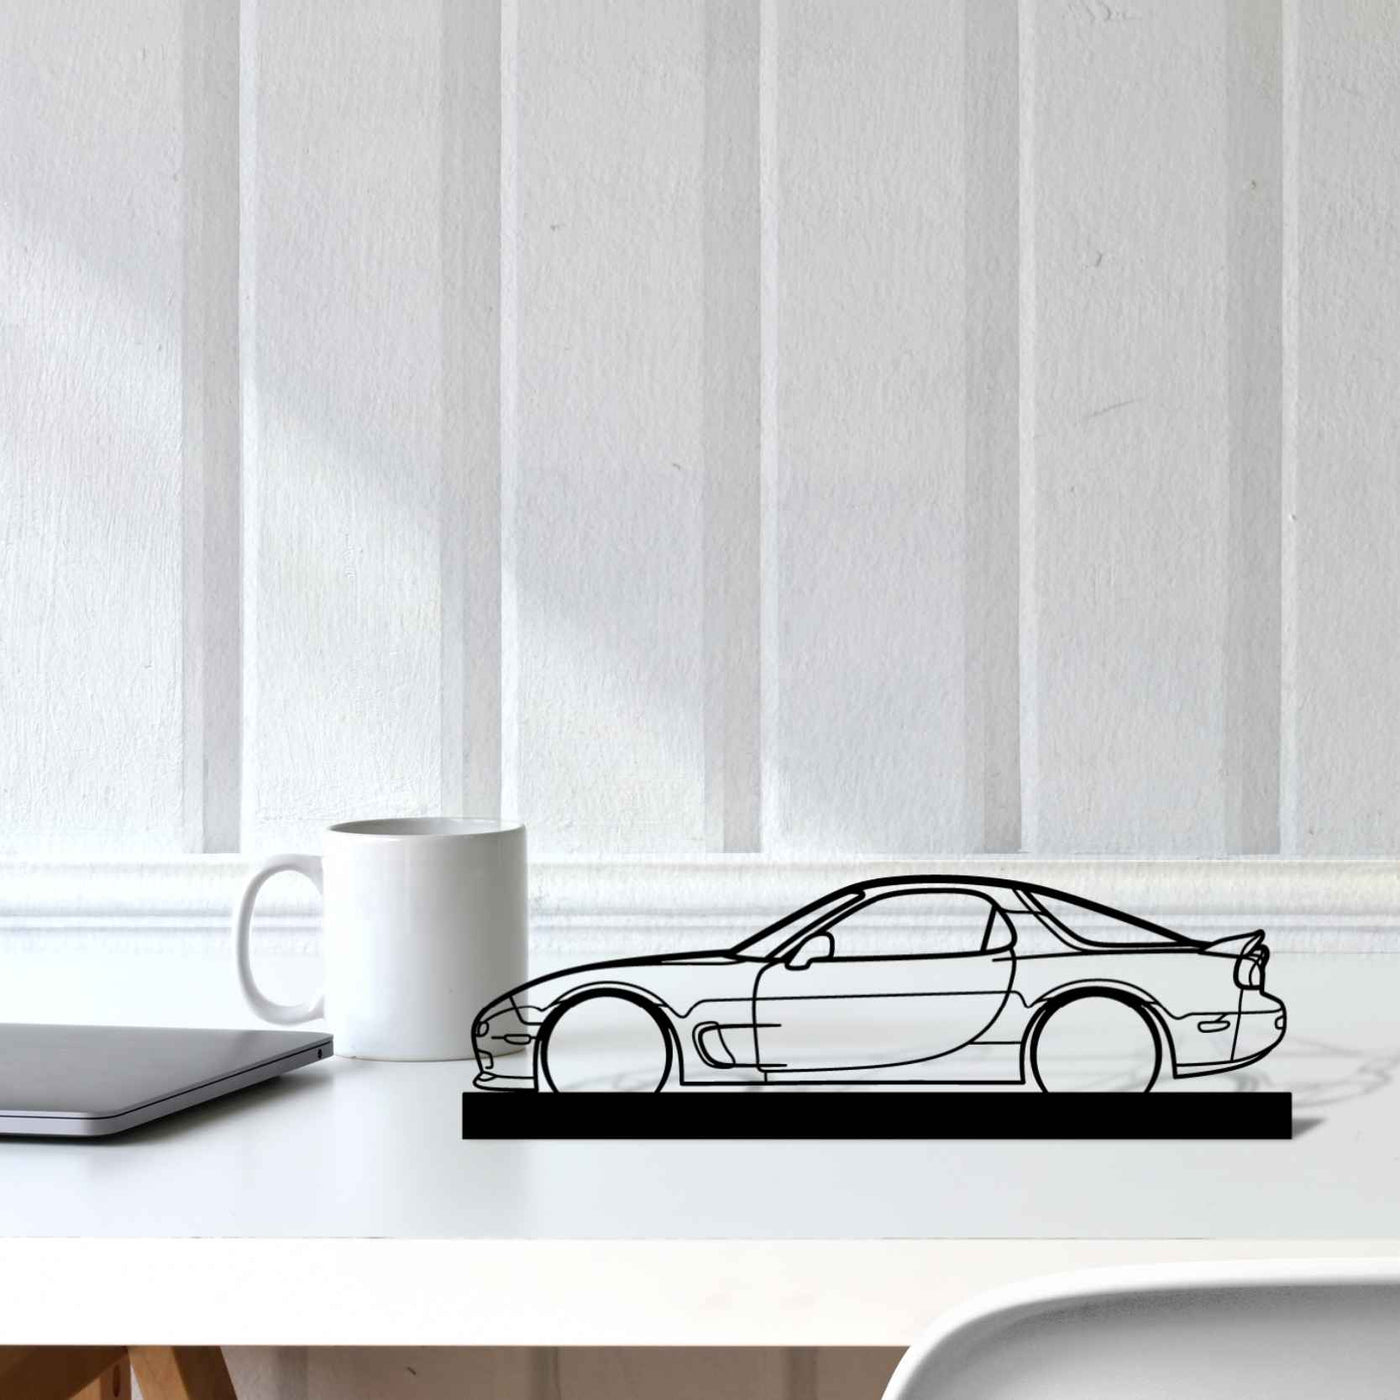 RX7 R1 Silhouette Metal Art Stand